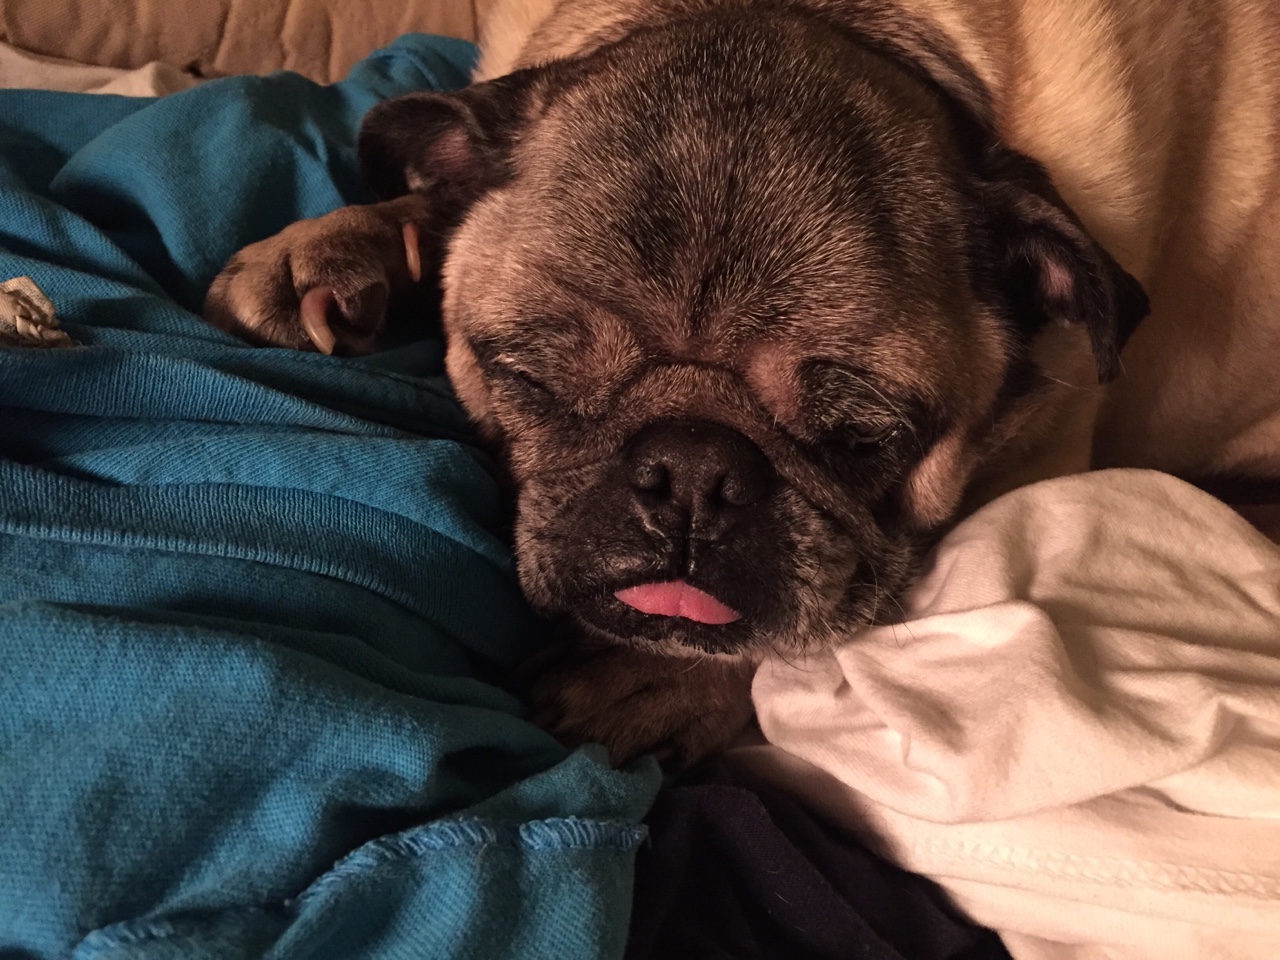 Sleeping dog with tongue sticking out just a little bit..